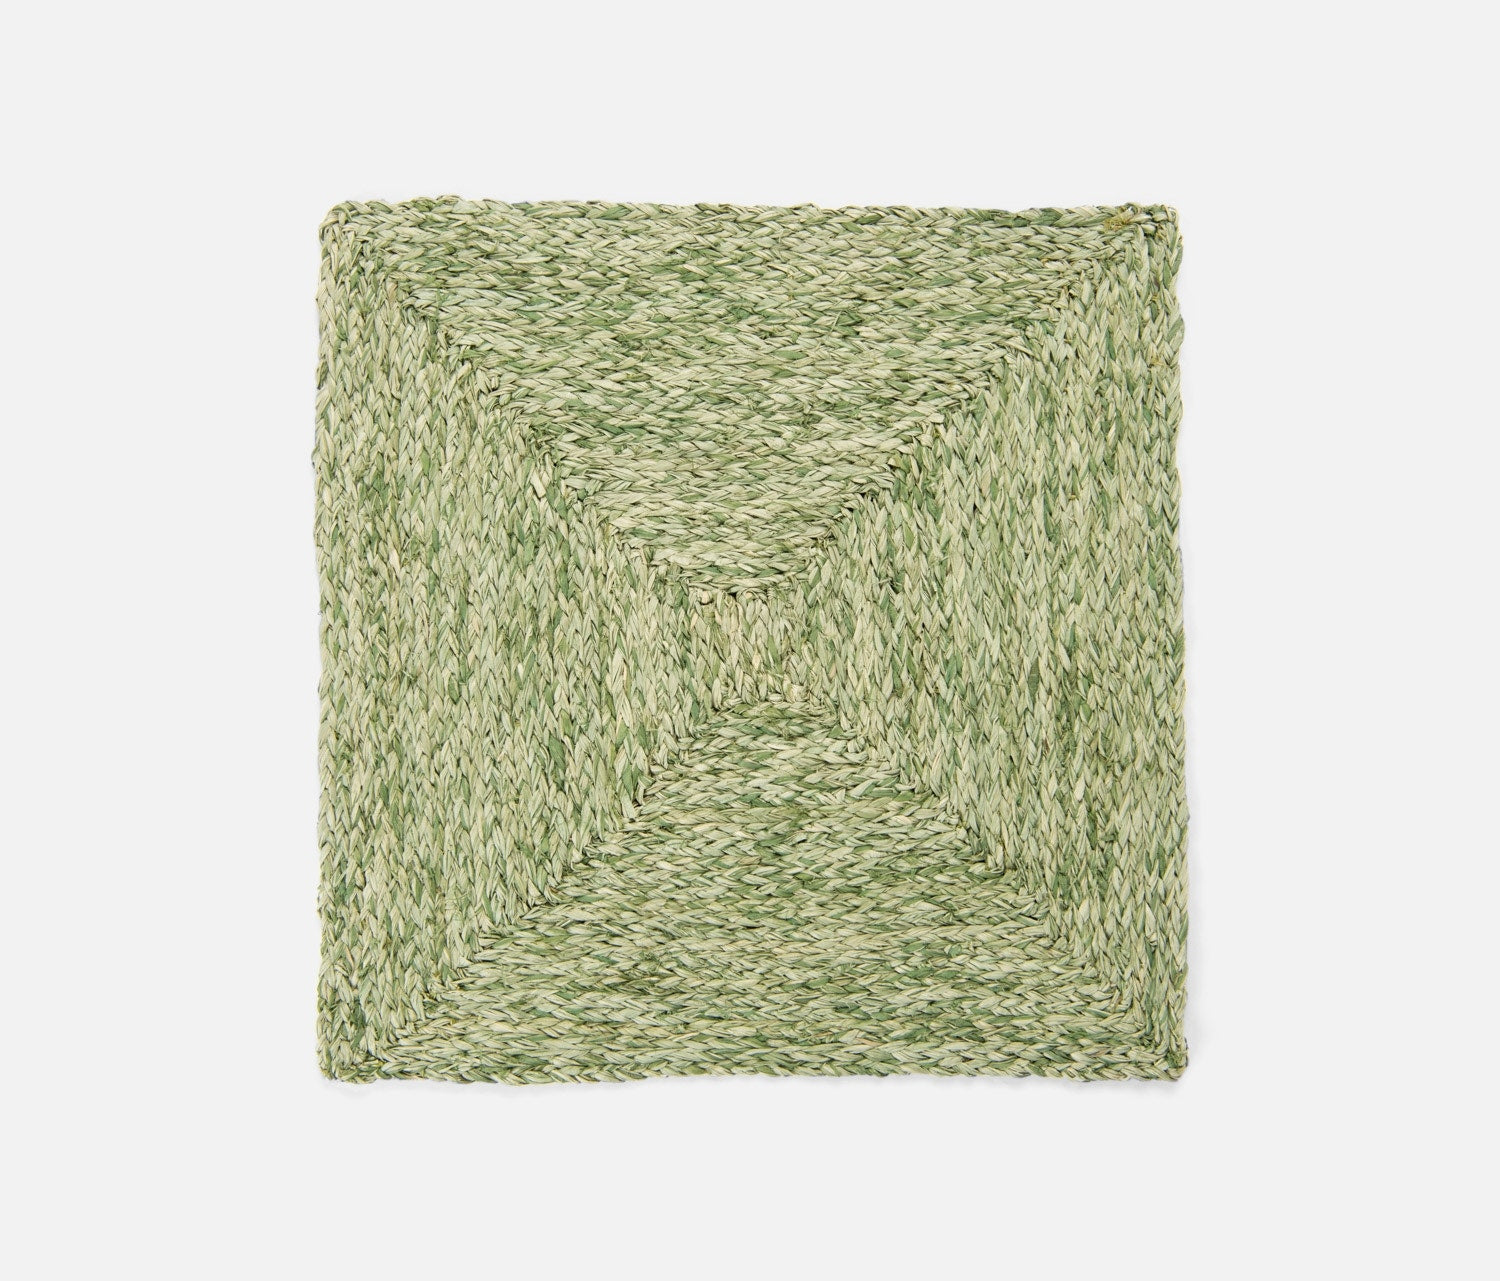 Zoey Pale Green Square Placemat, Set of 4